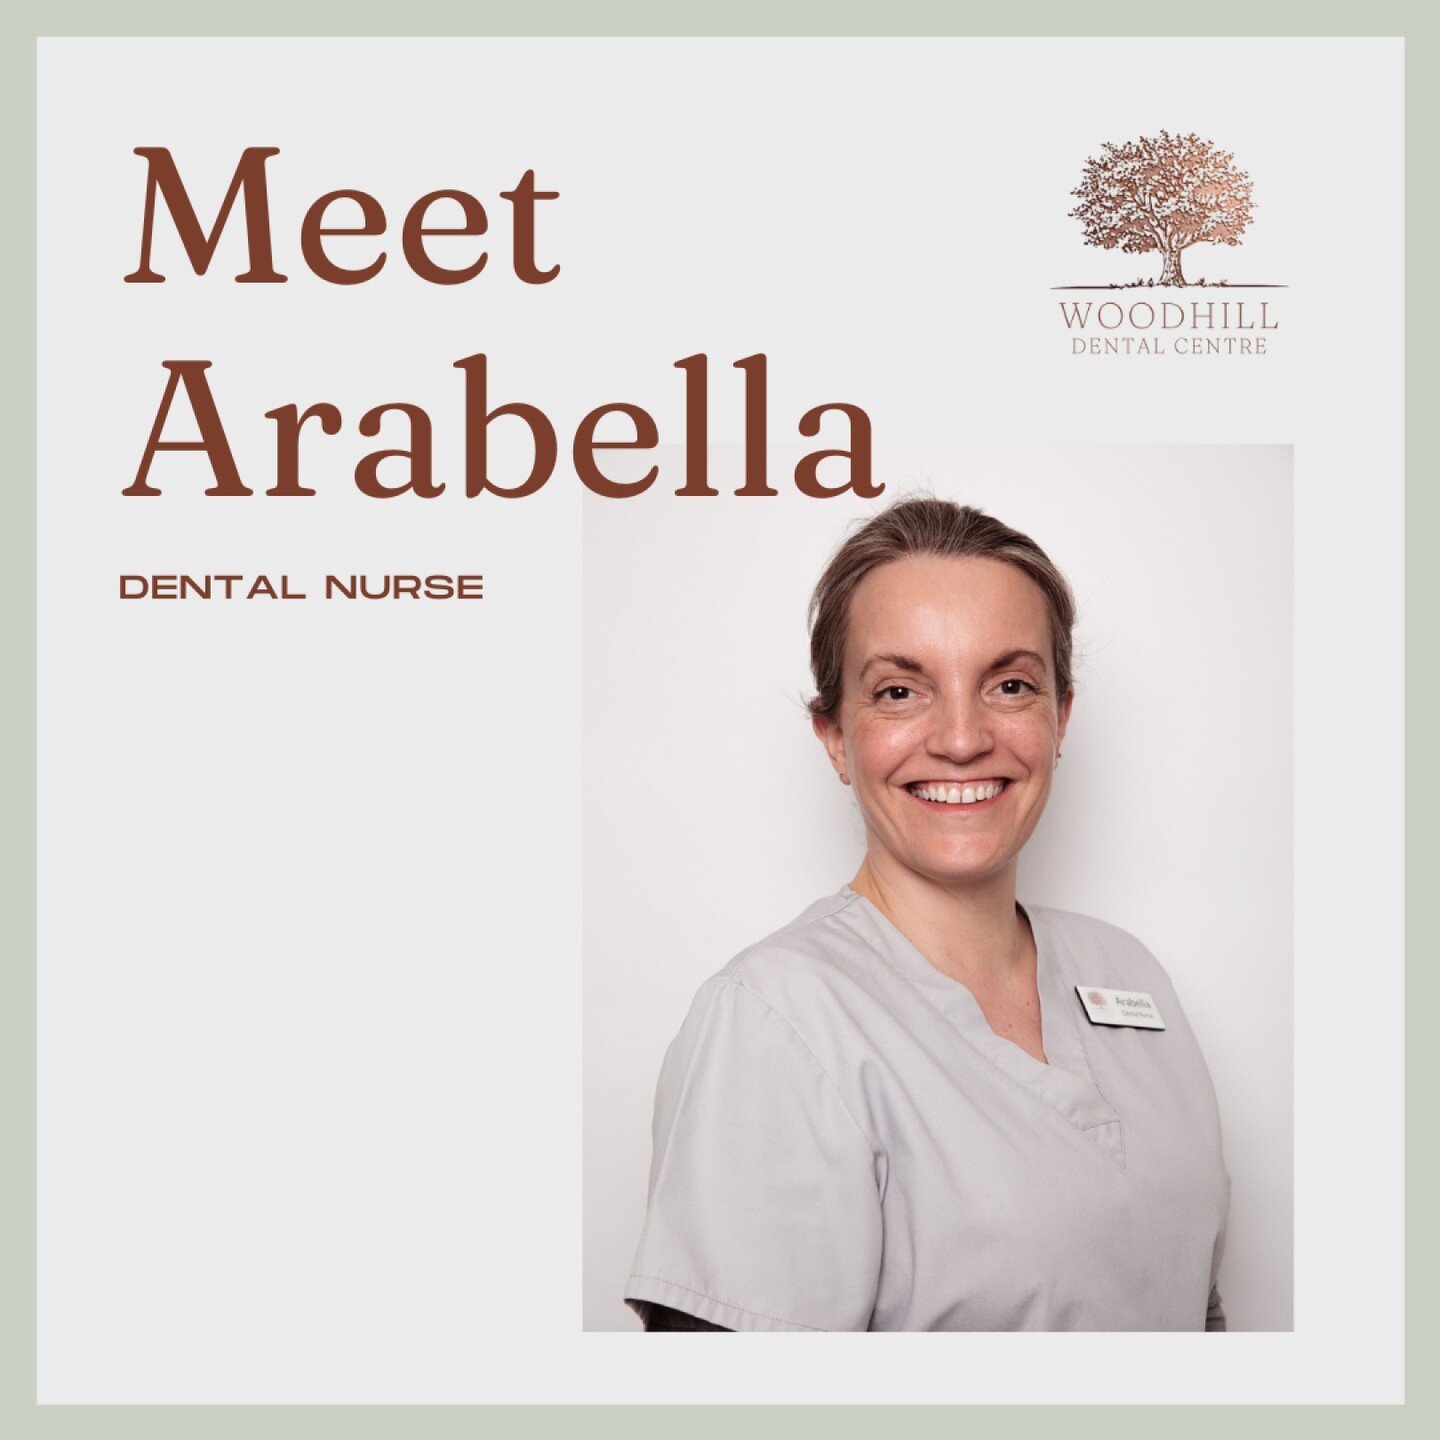 Meet The Team Monday - Introducing Arabella:

Arabella joined our Woodhill team in September 2023. With an extensive background in dental nursing, Arabella has been a valued member of the local dental community since qualifying in 1998. She has worke